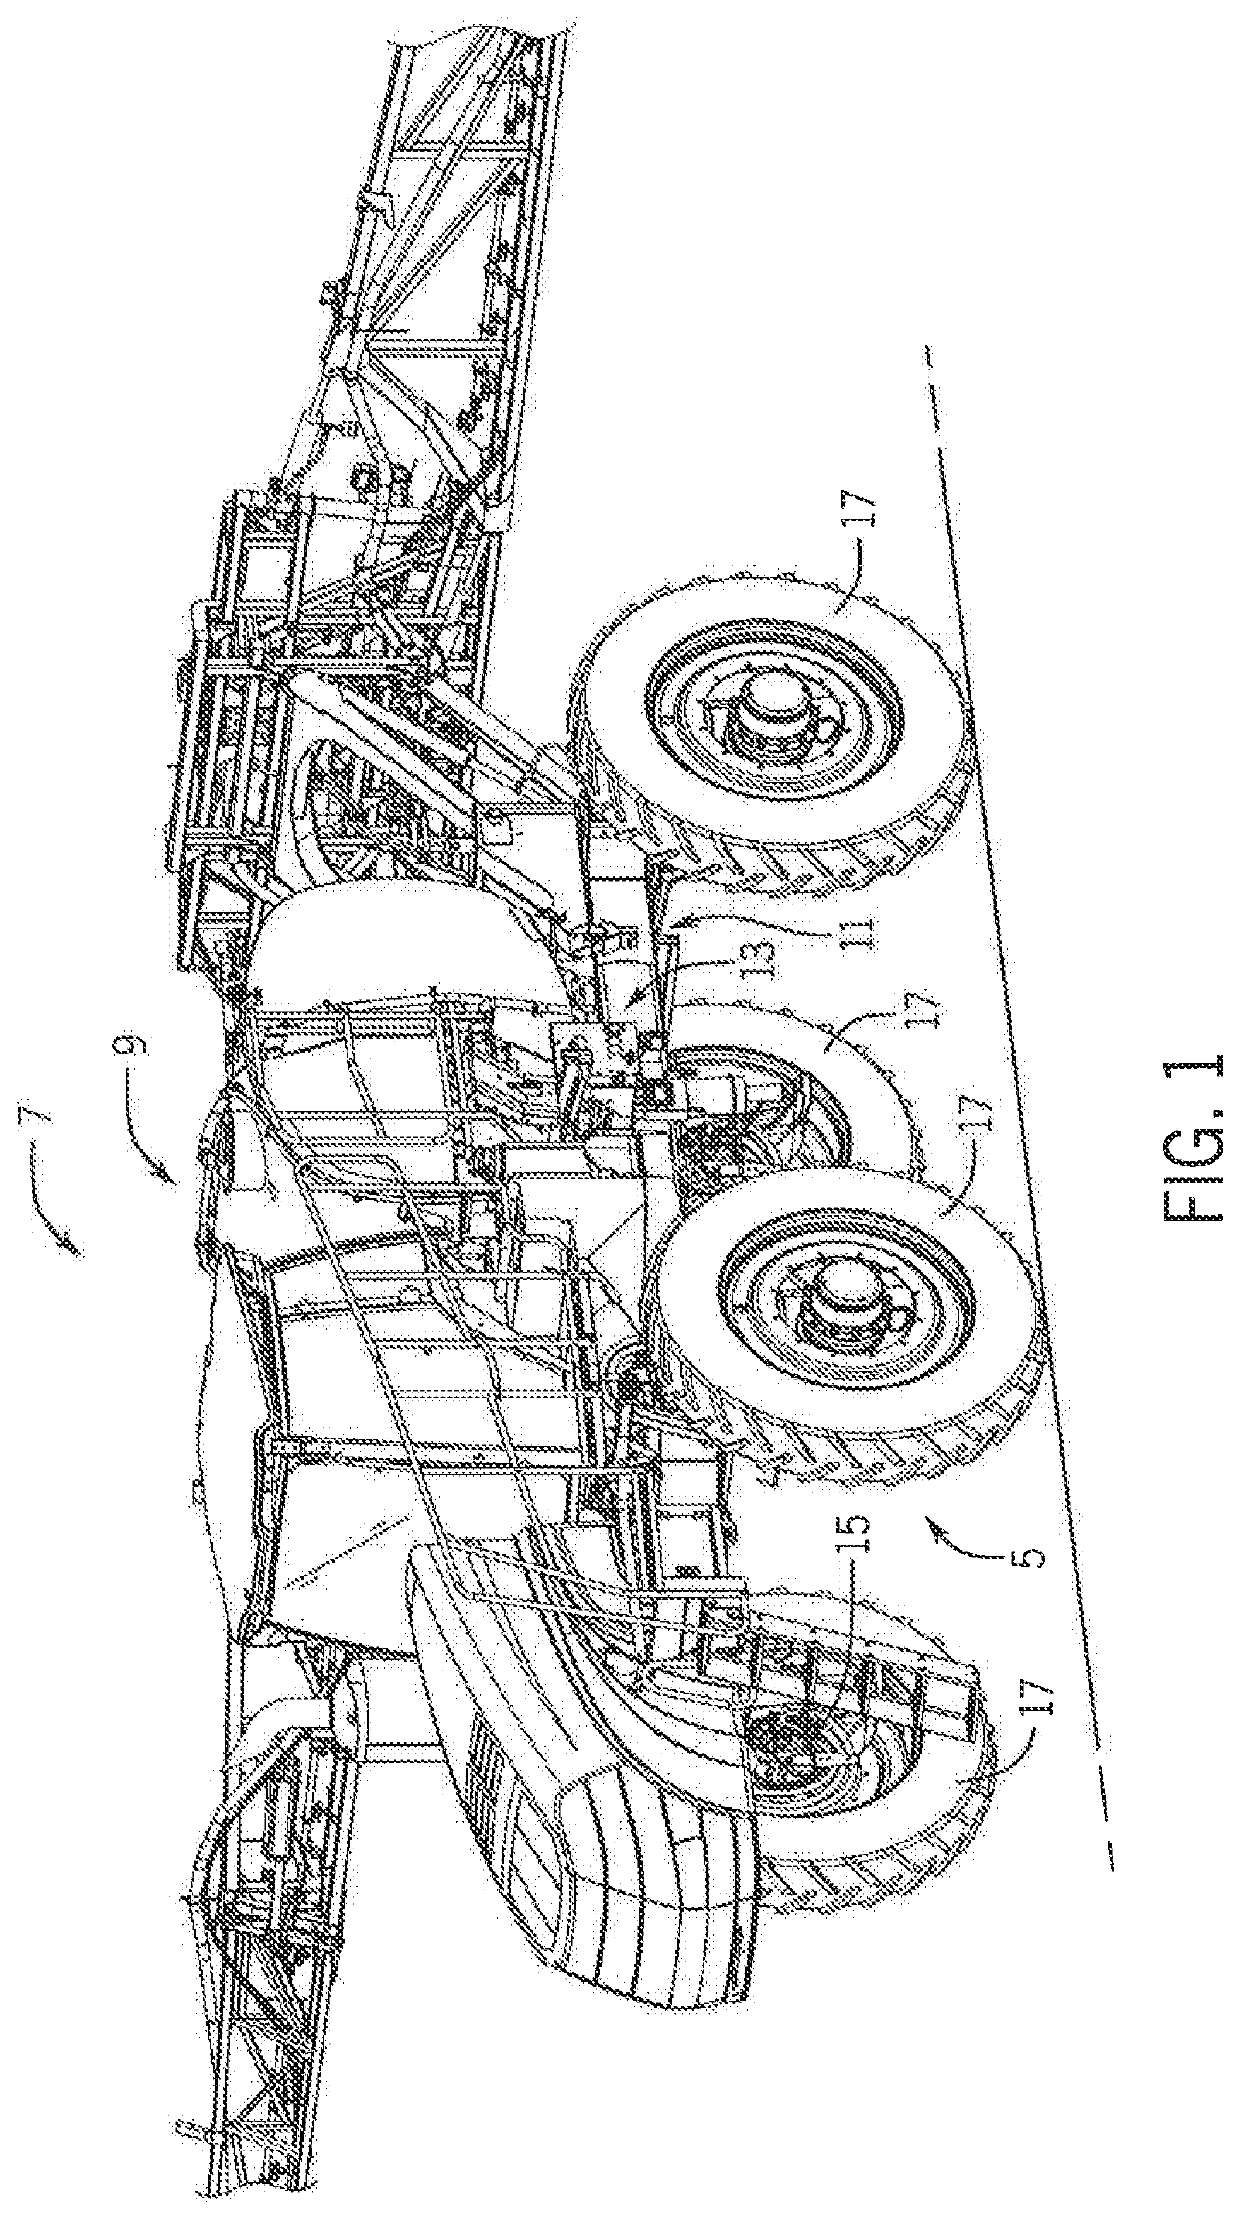 Mount system with bearing race friction lock assembly for agricultural machine